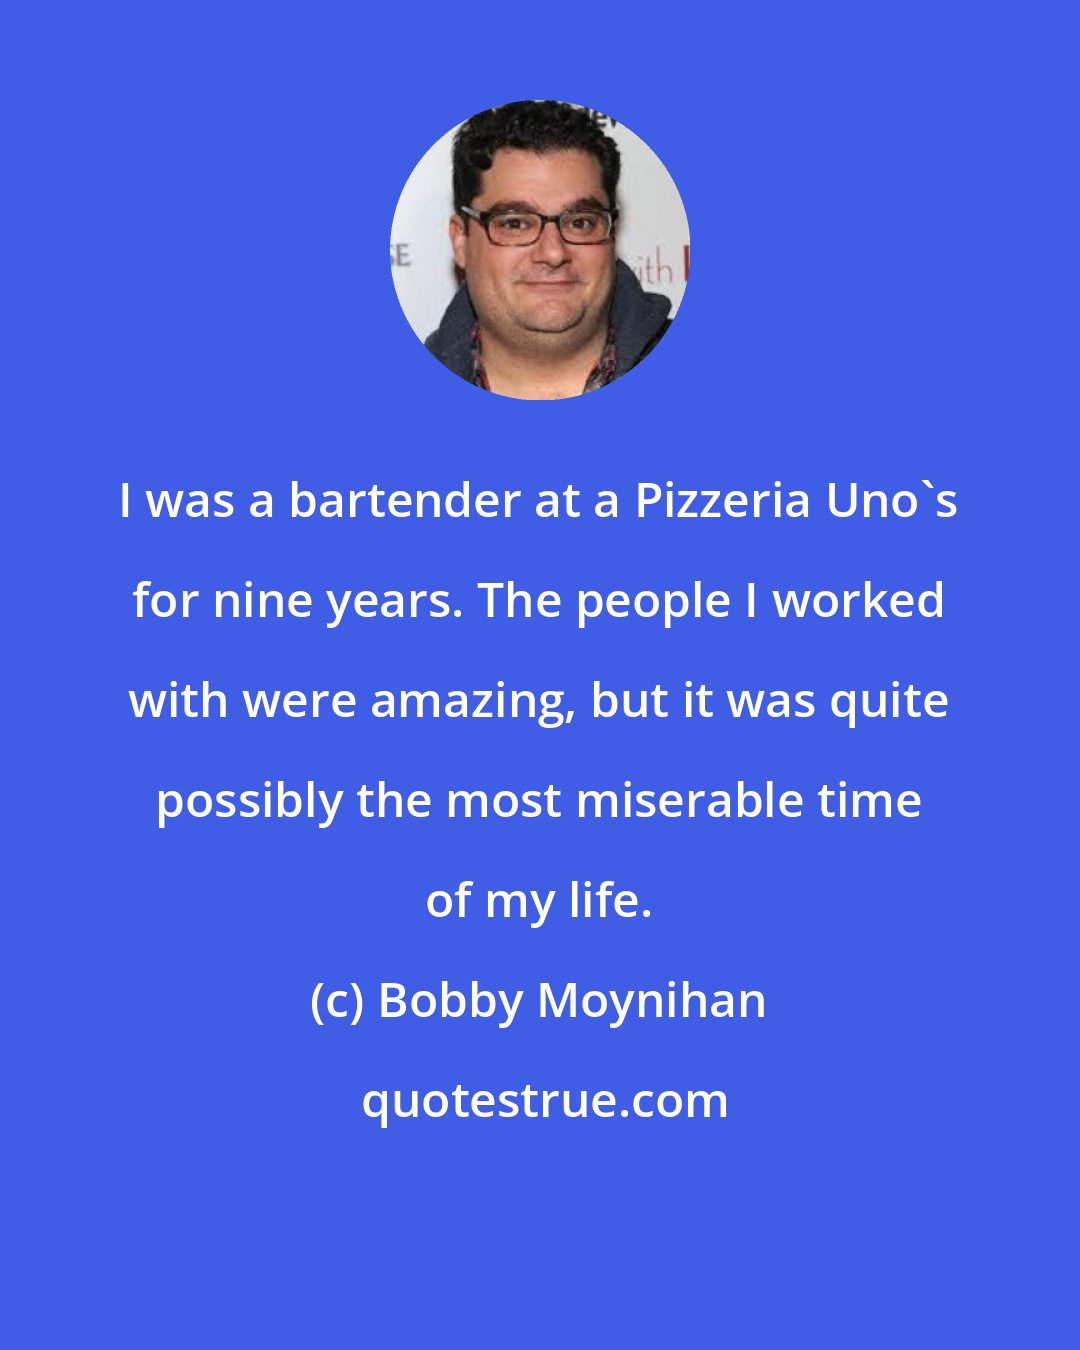 Bobby Moynihan: I was a bartender at a Pizzeria Uno's for nine years. The people I worked with were amazing, but it was quite possibly the most miserable time of my life.